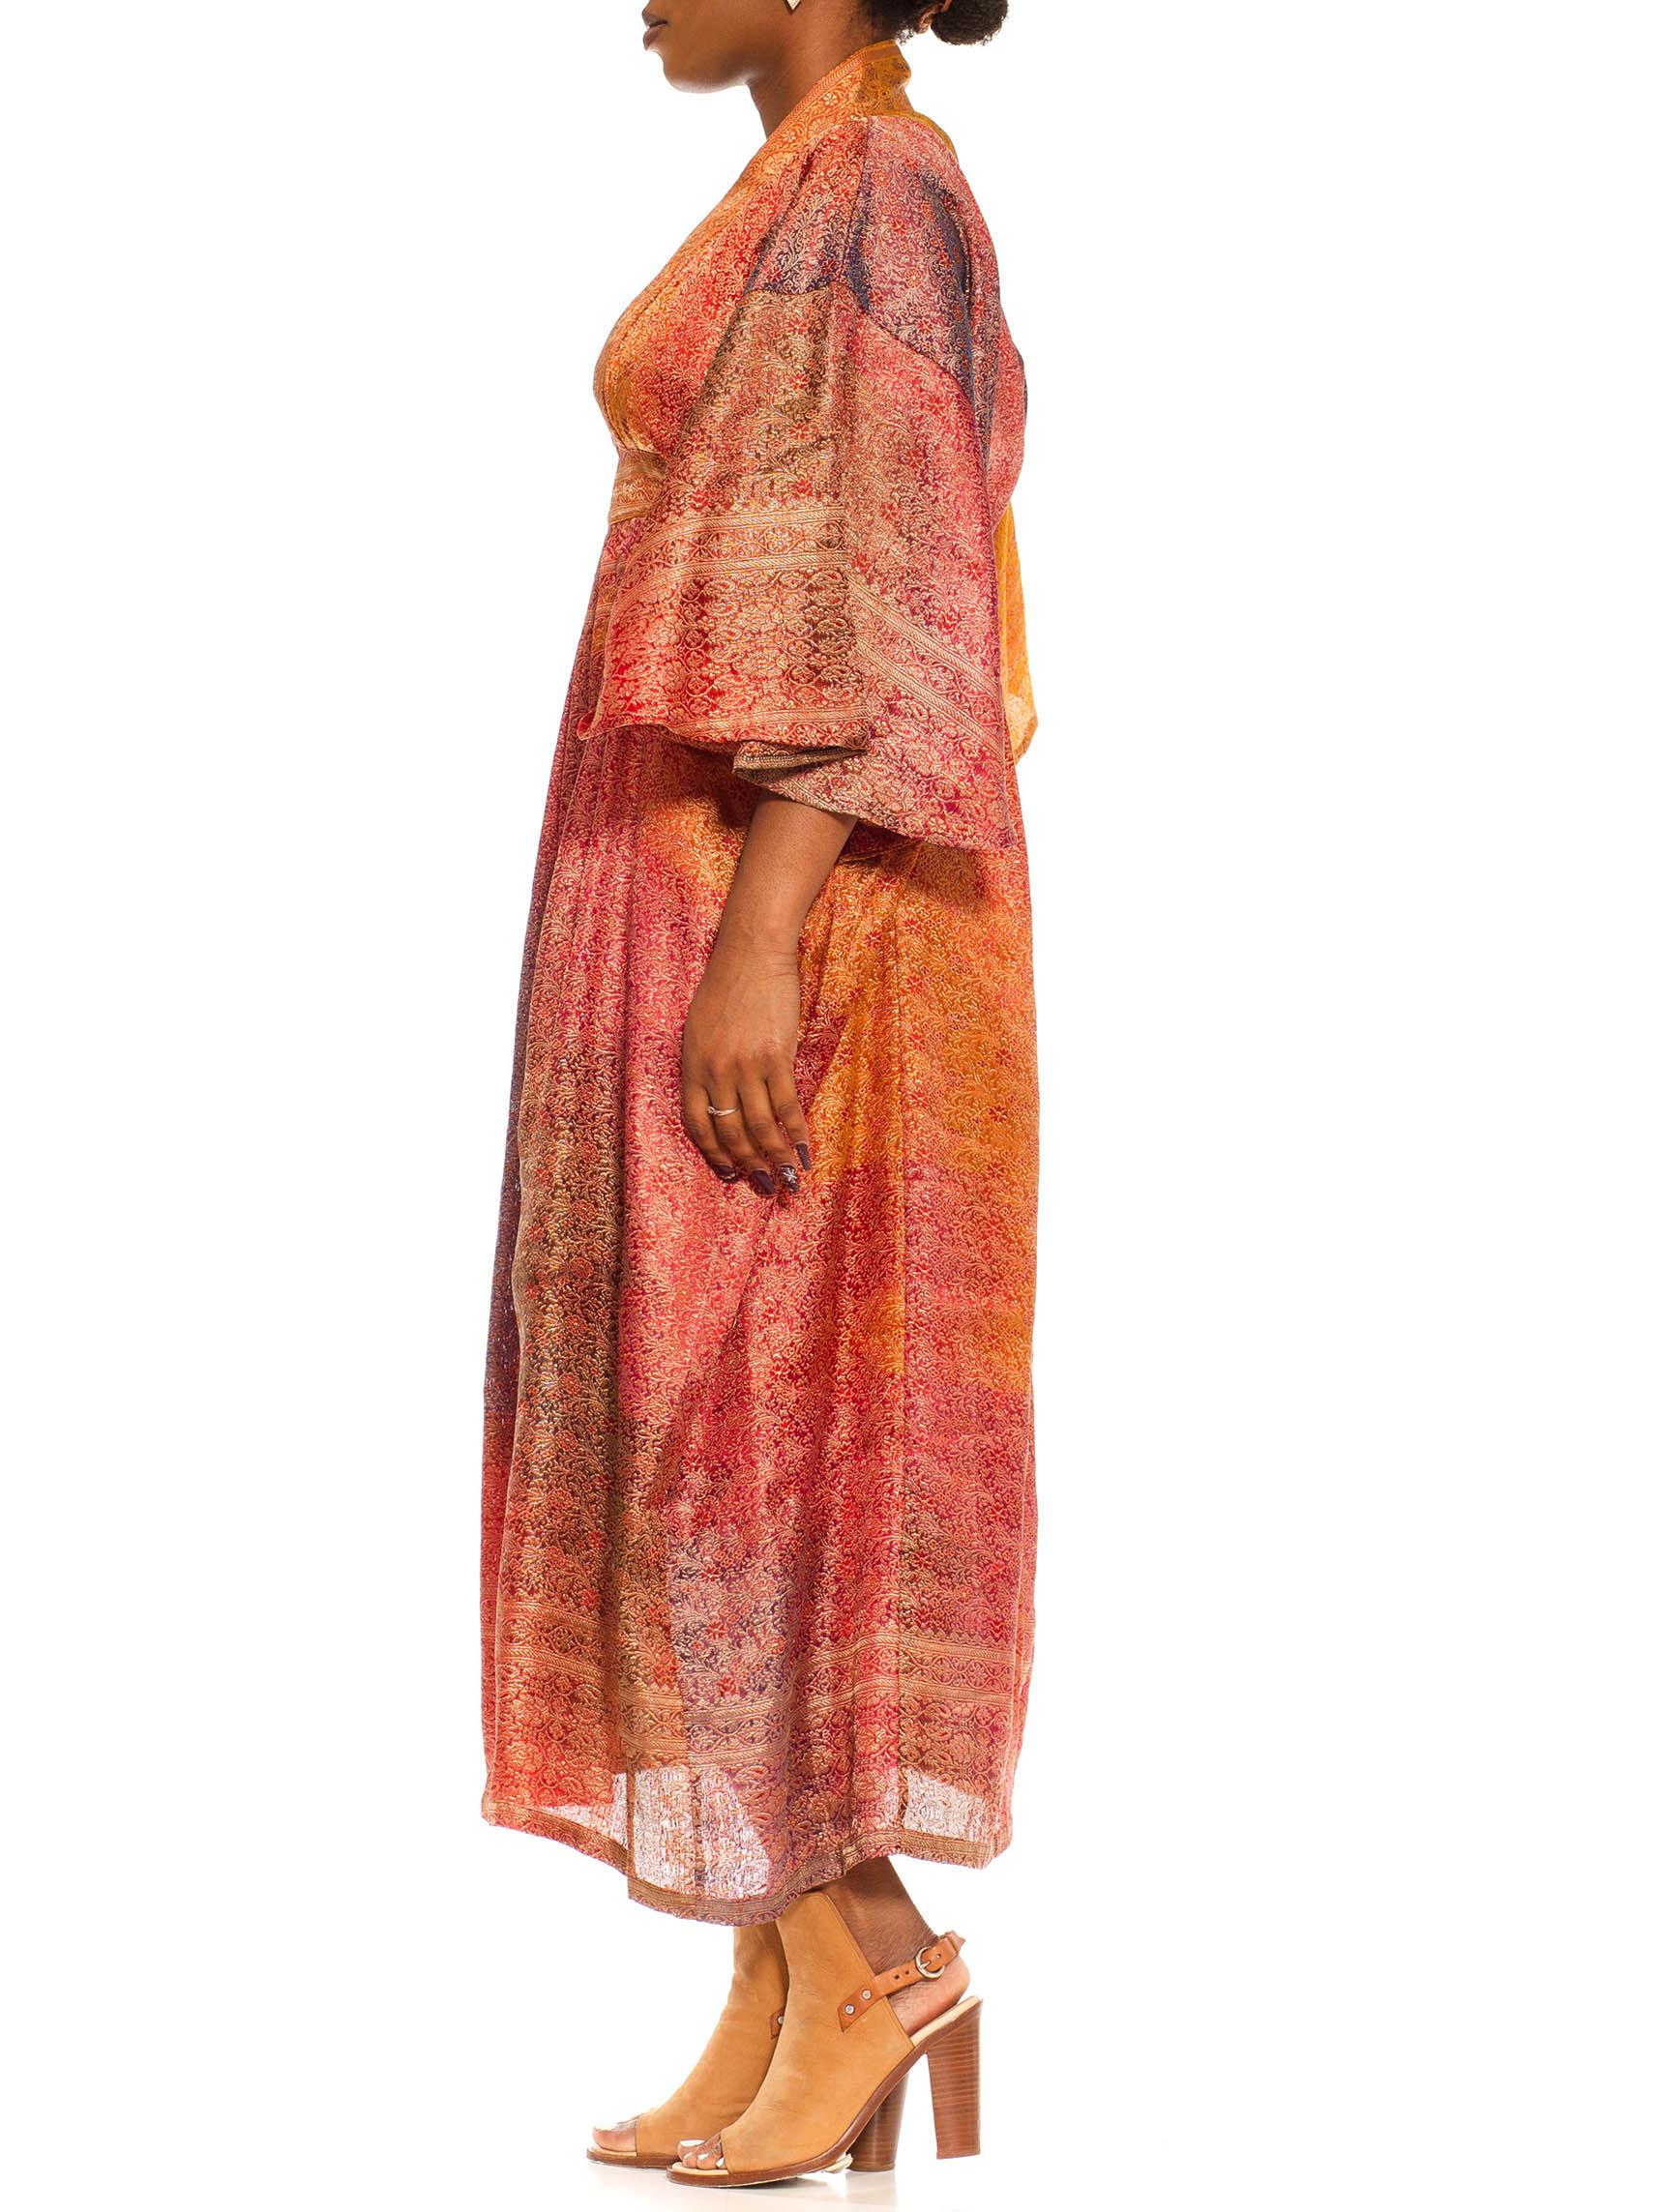 Morphew Collection Orange & Yellow Multicolor Metallic Gold Silk Kaftan Made From Vintage Saris
MORPHEW COLLECTION is made entirely by hand in our NYC Ateliér of rare antique materials sourced from around the globe. Our sustainable vintage materials